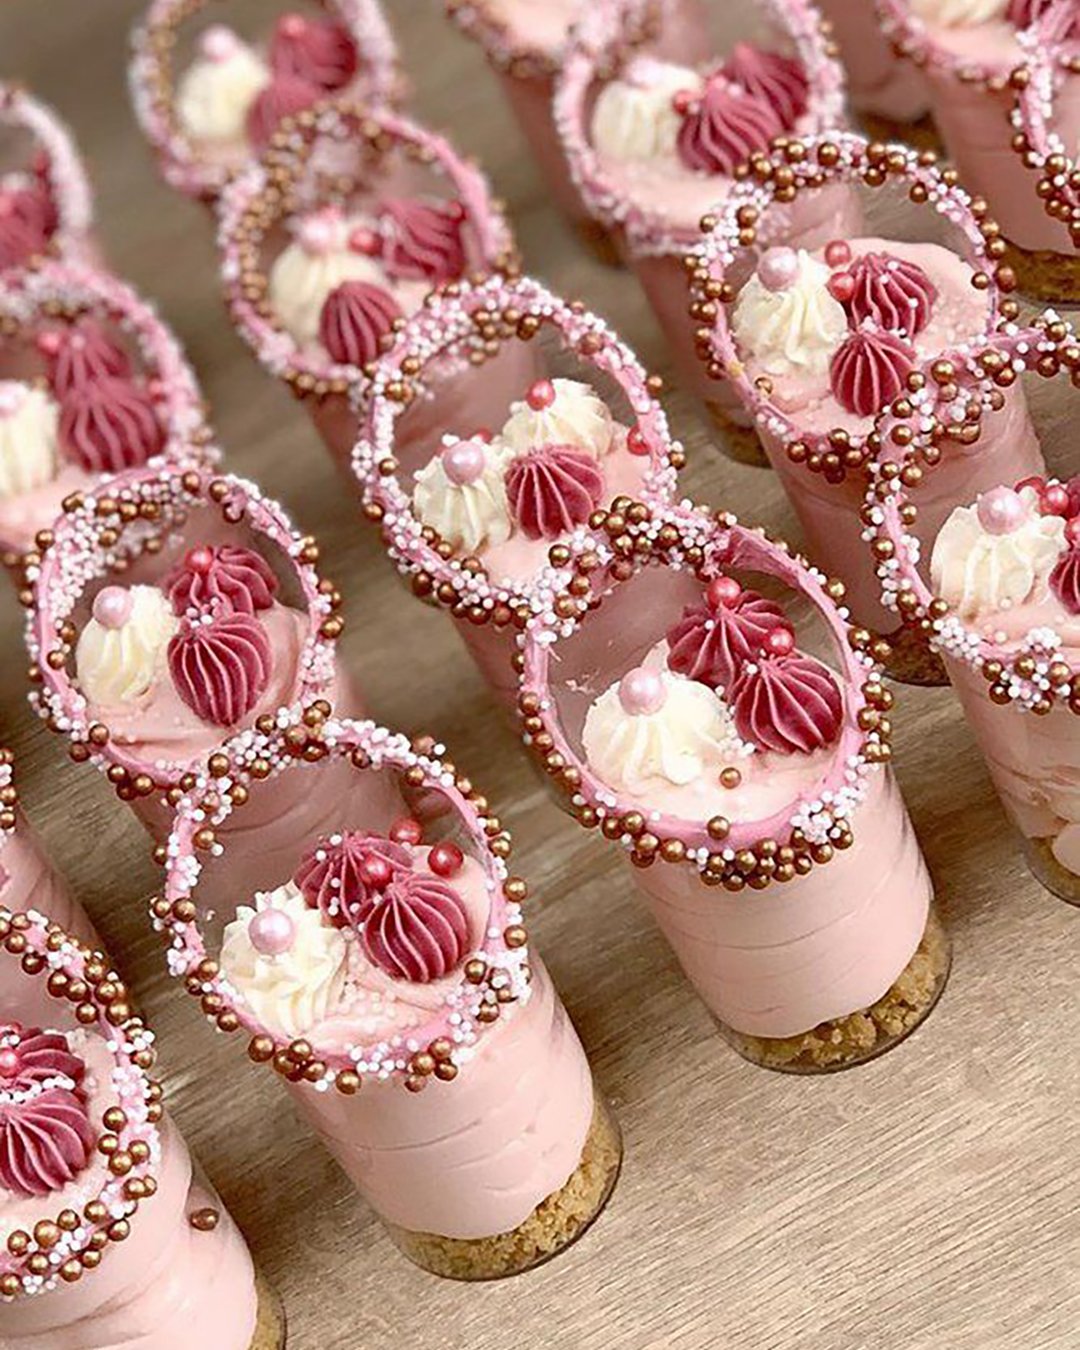 non traditional wedding dessert ideas shots with pink pearls cake N prinkles.